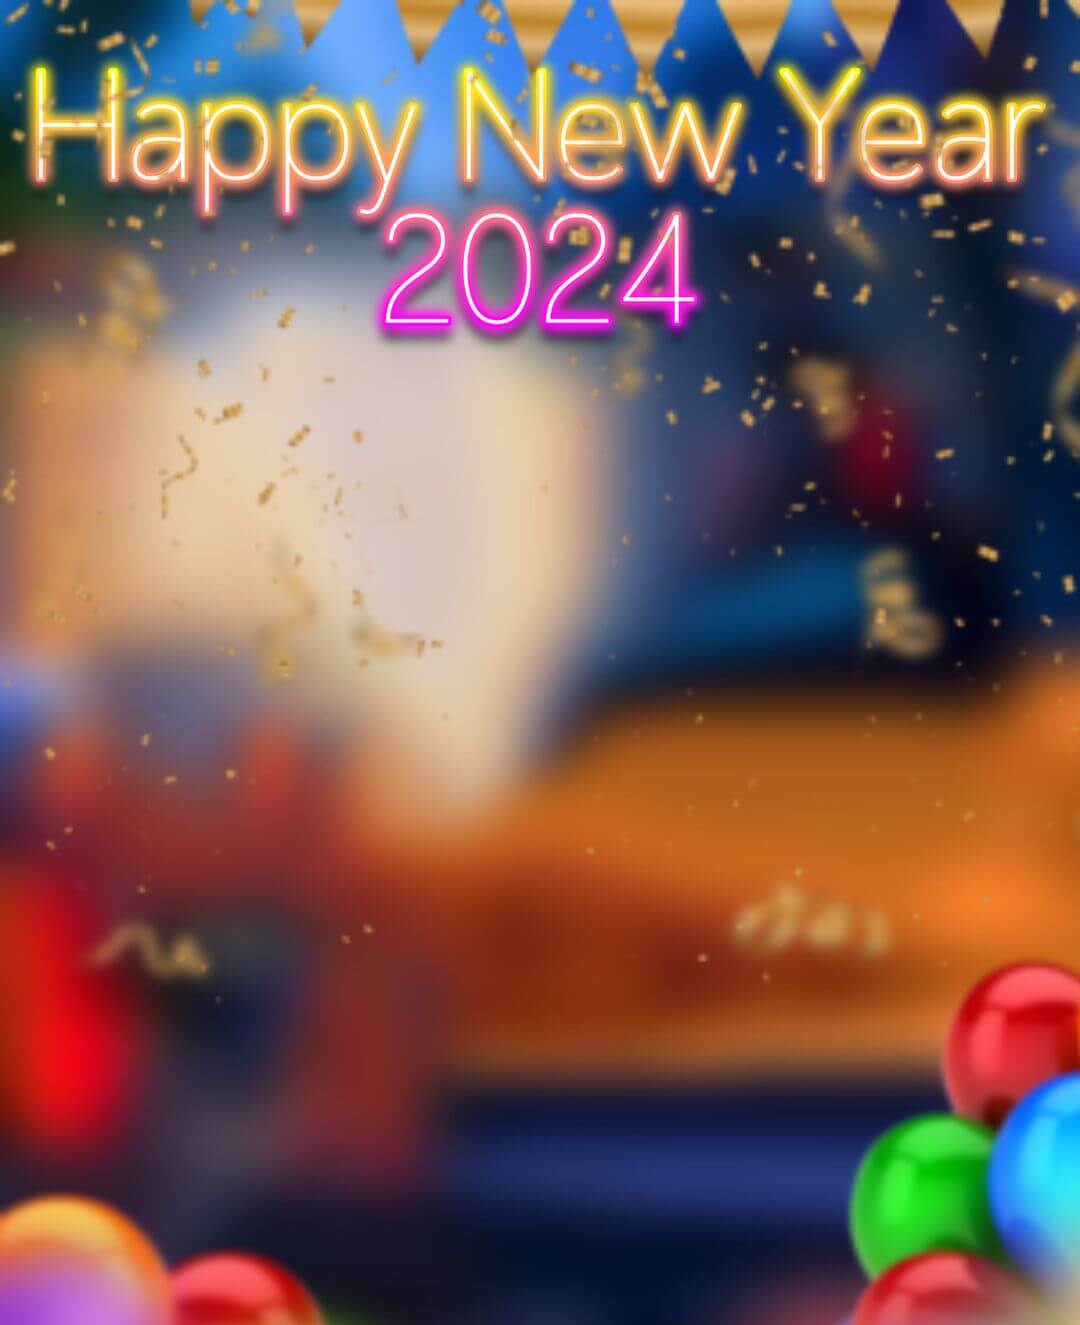 Happy New Year 2024 Background For Editing Image HD